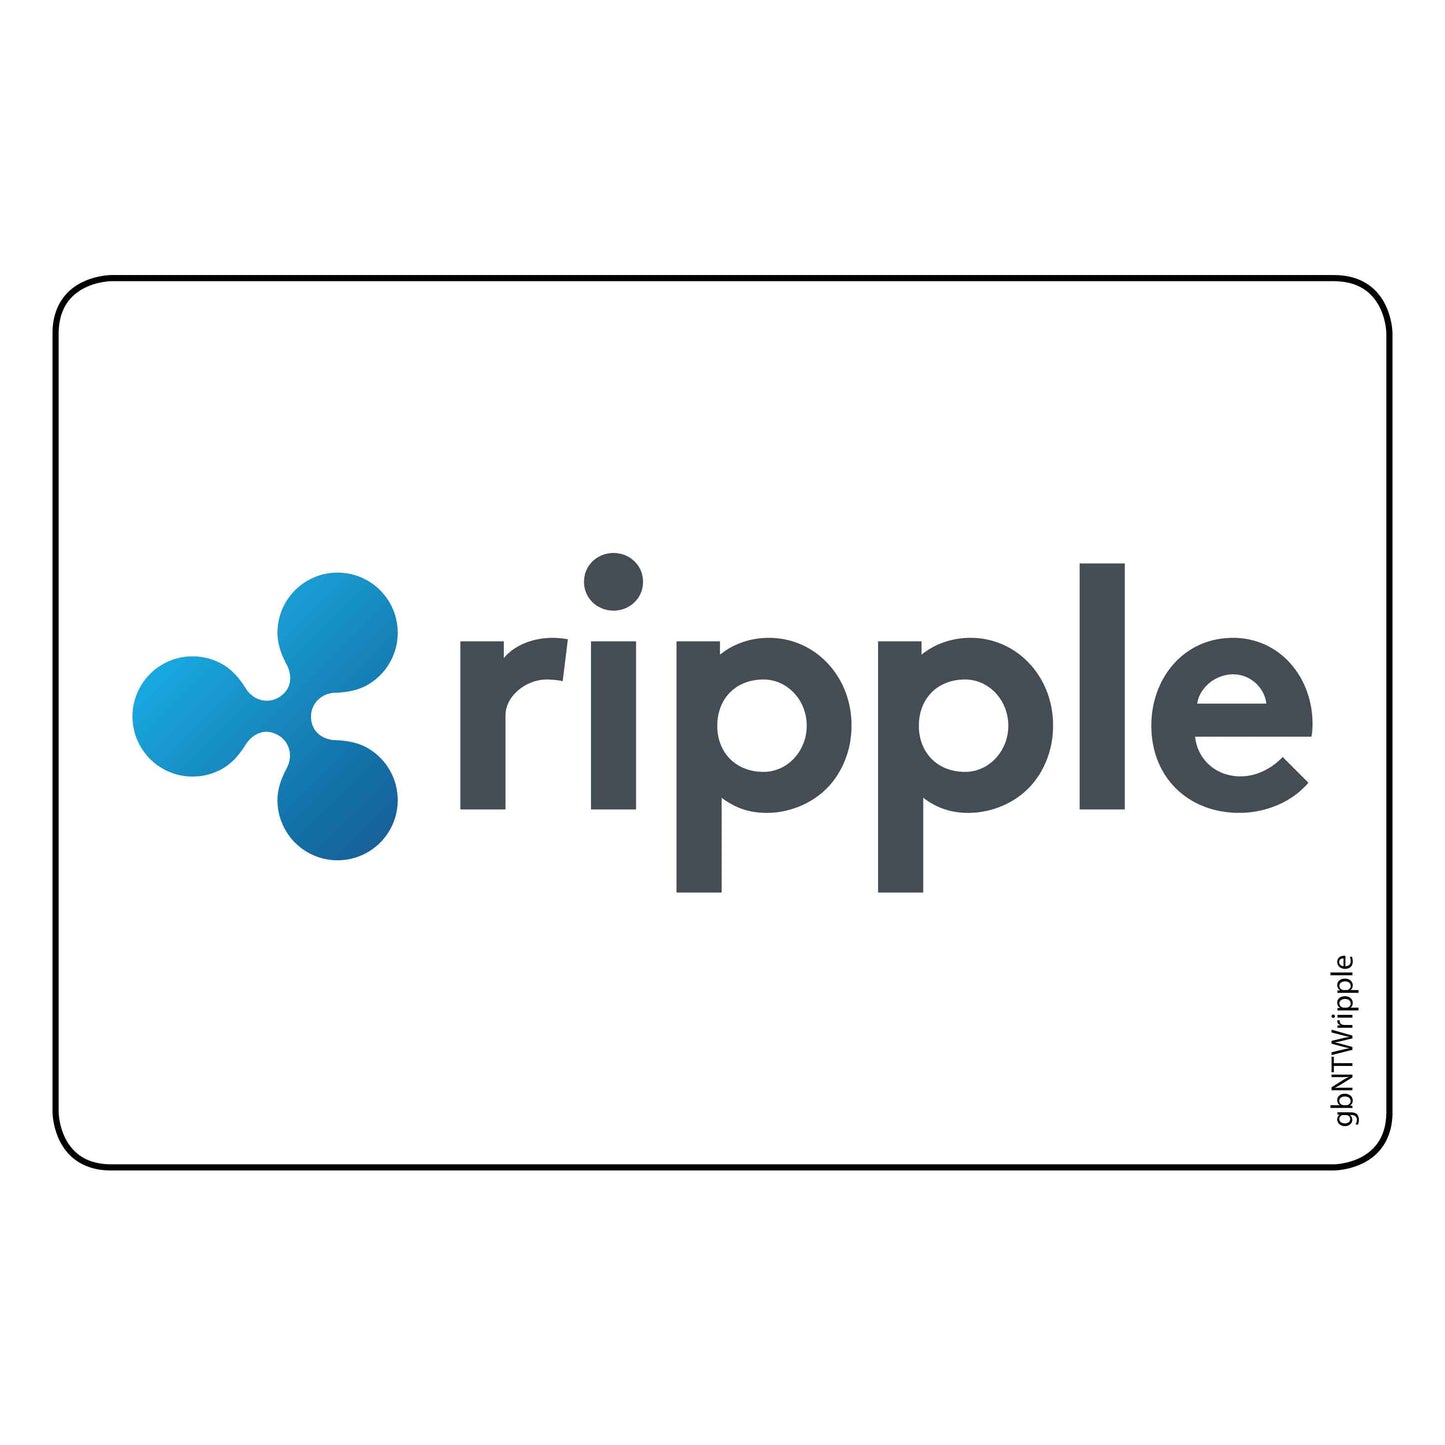 Single Network Decal, Ripple. 3 inches by 2 inches in size. 